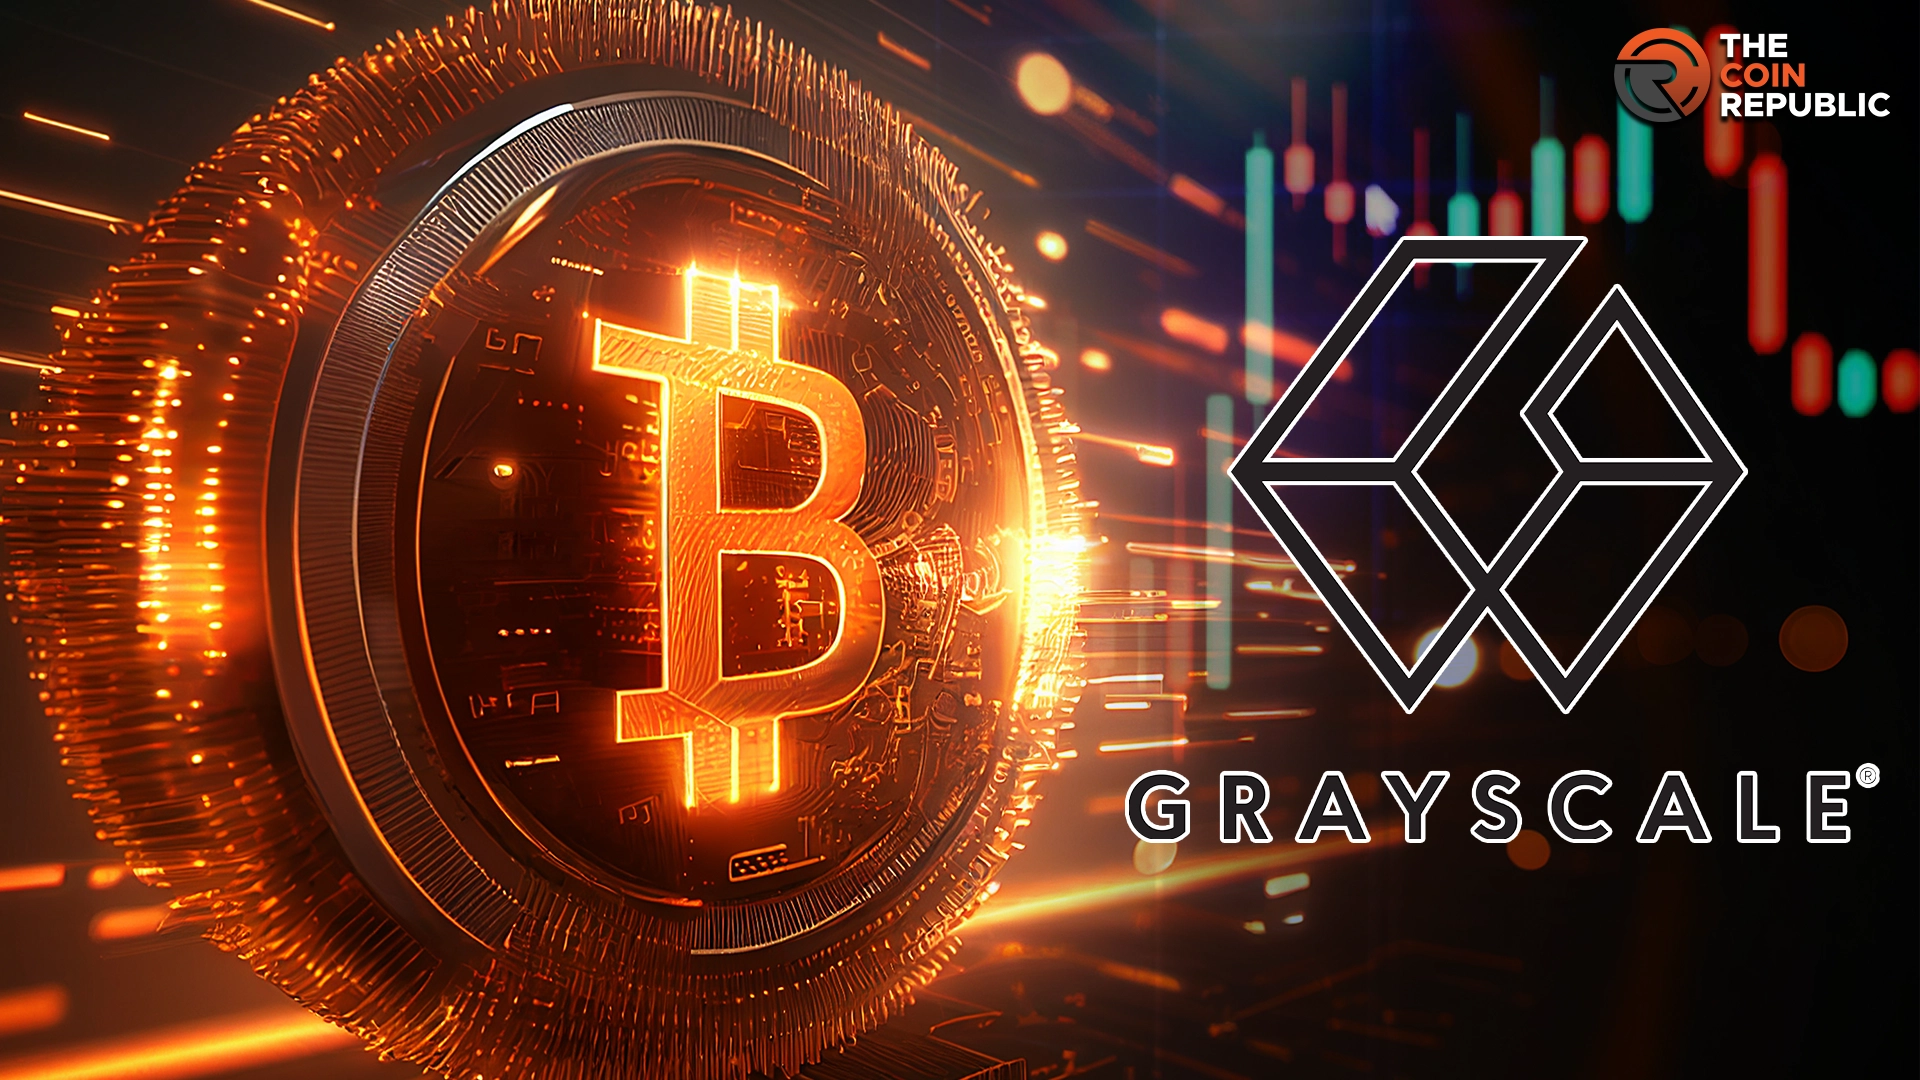 Grayscale’s GBTC Sees First Inflows After Months Of Outflows